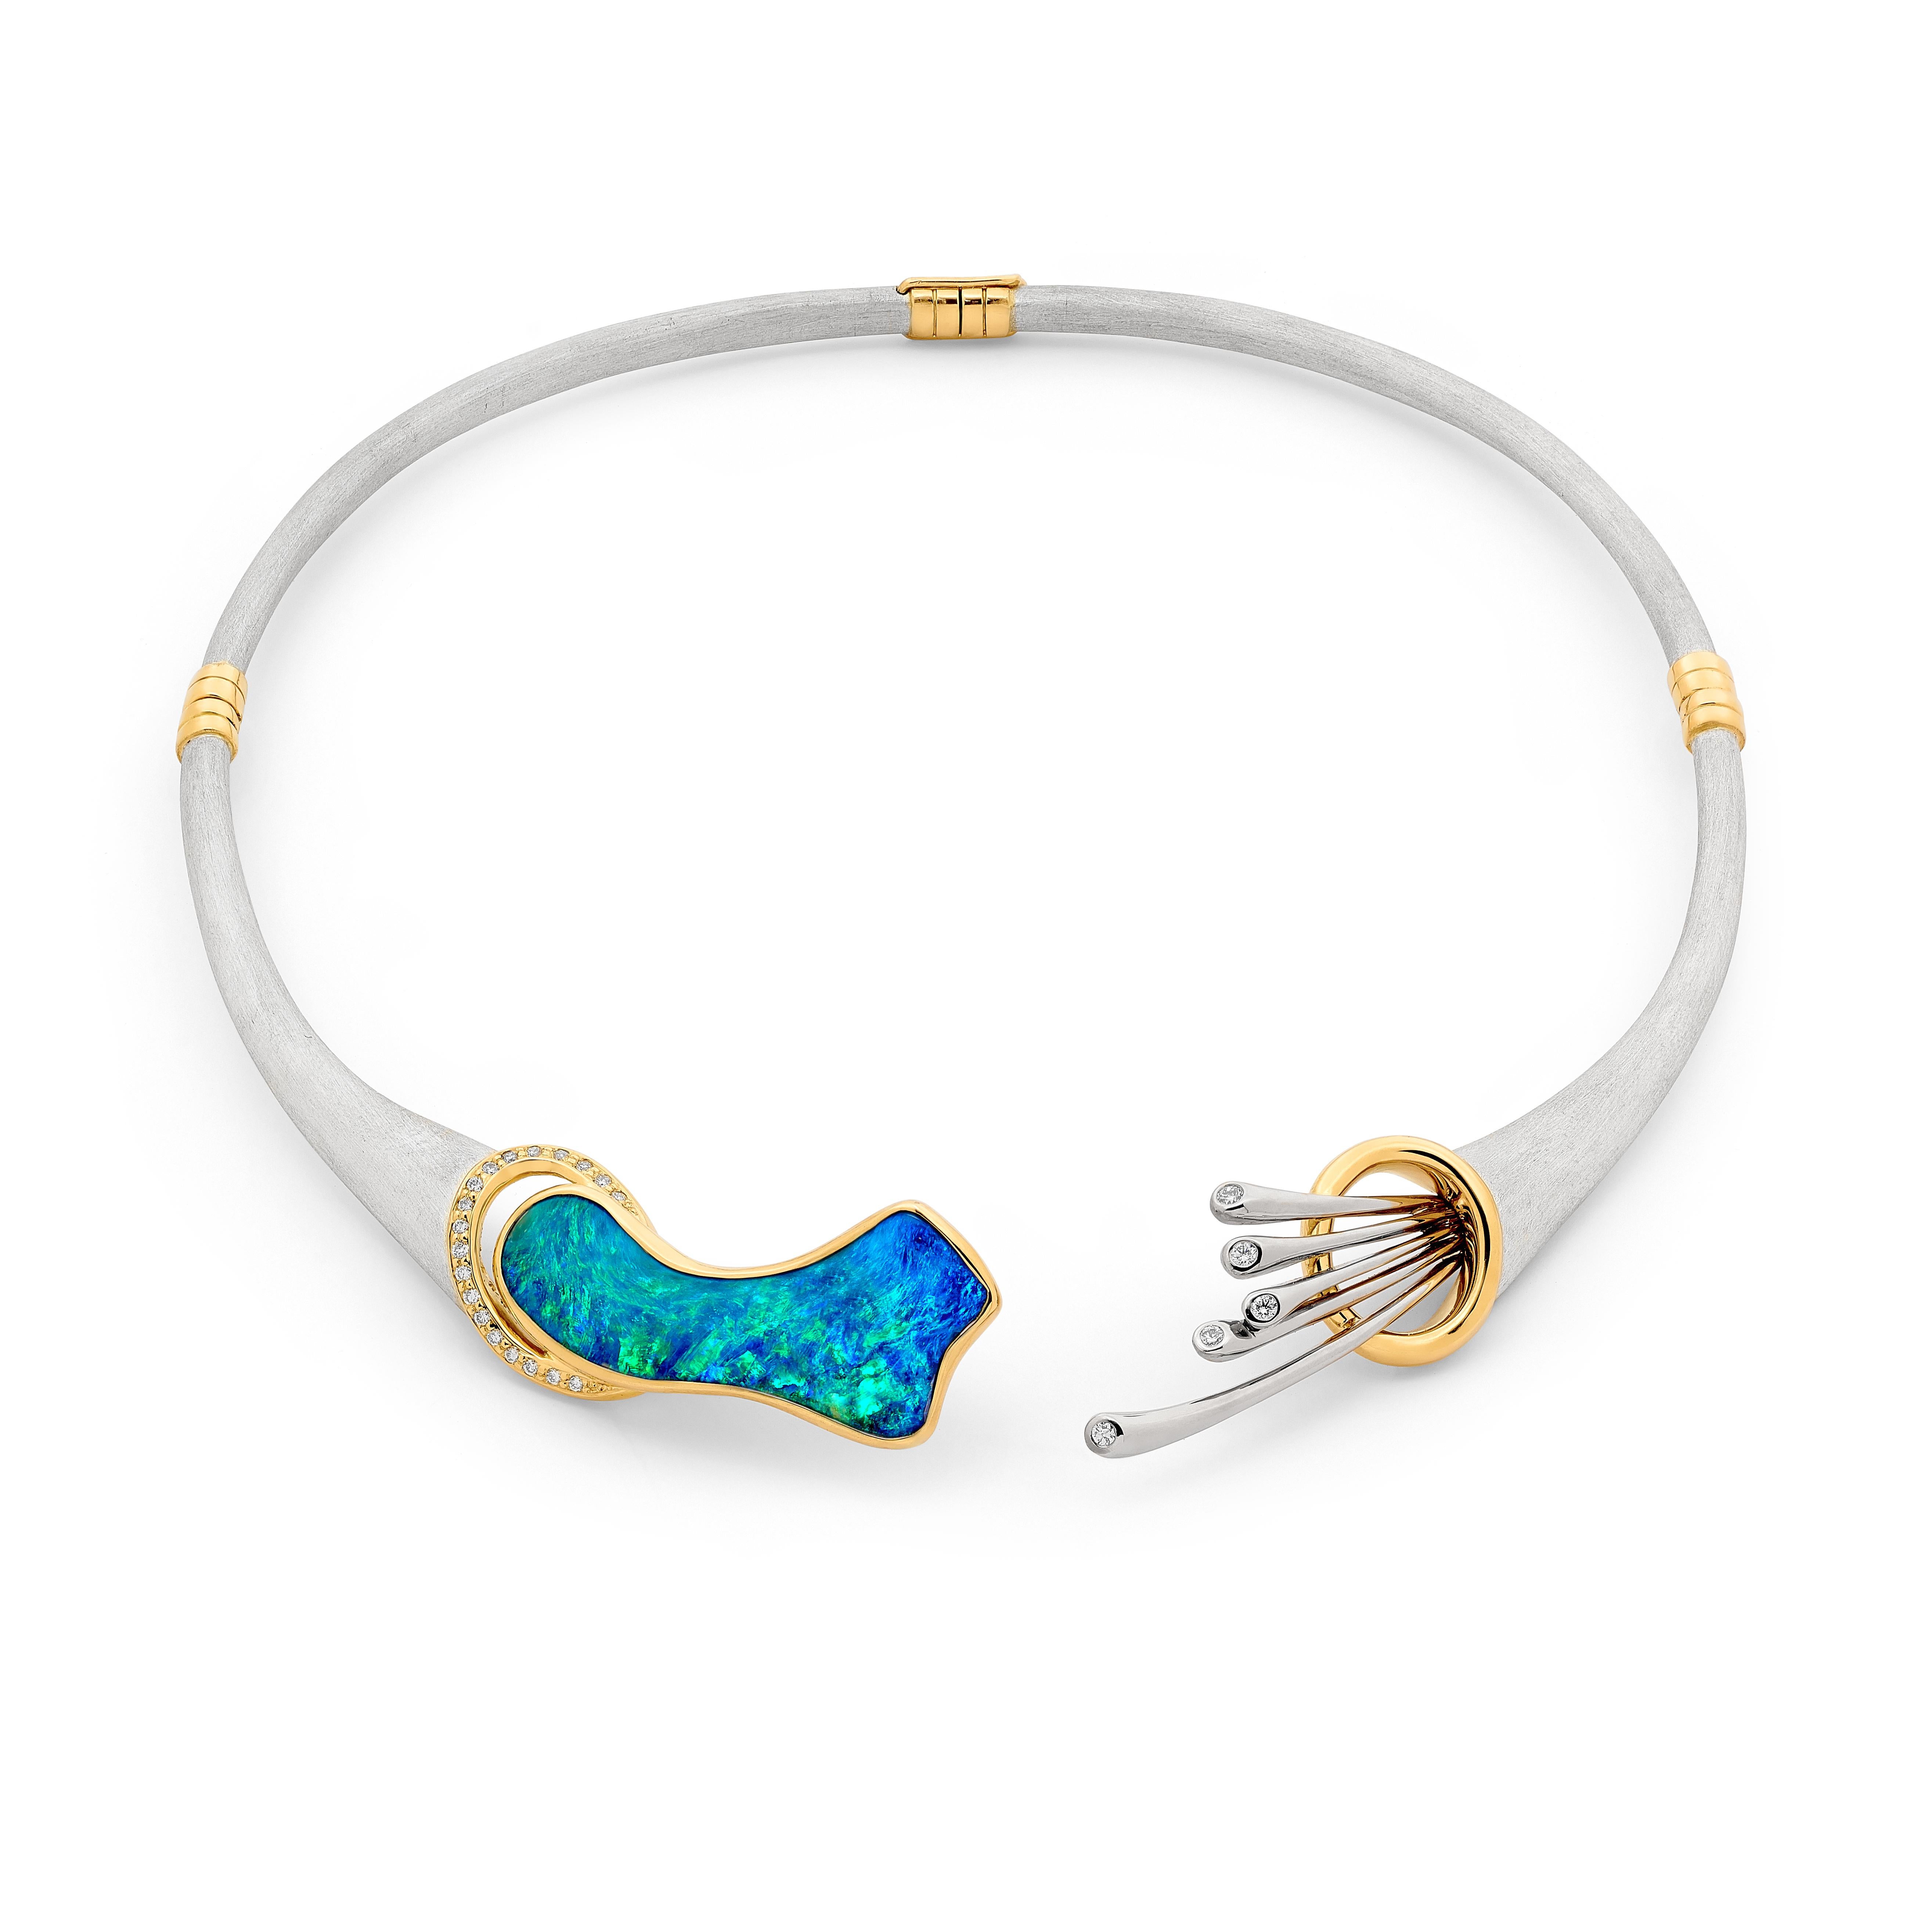 Graceful and utterly radiant is the wearer of the exquisite ‘Eirene’ boulder opal (26.45ct) necklace as she charms the world with her unwavering and strong spirit. Superbly handcrafted out of 18K gold and sterling silver to hold 26.45ct opal from